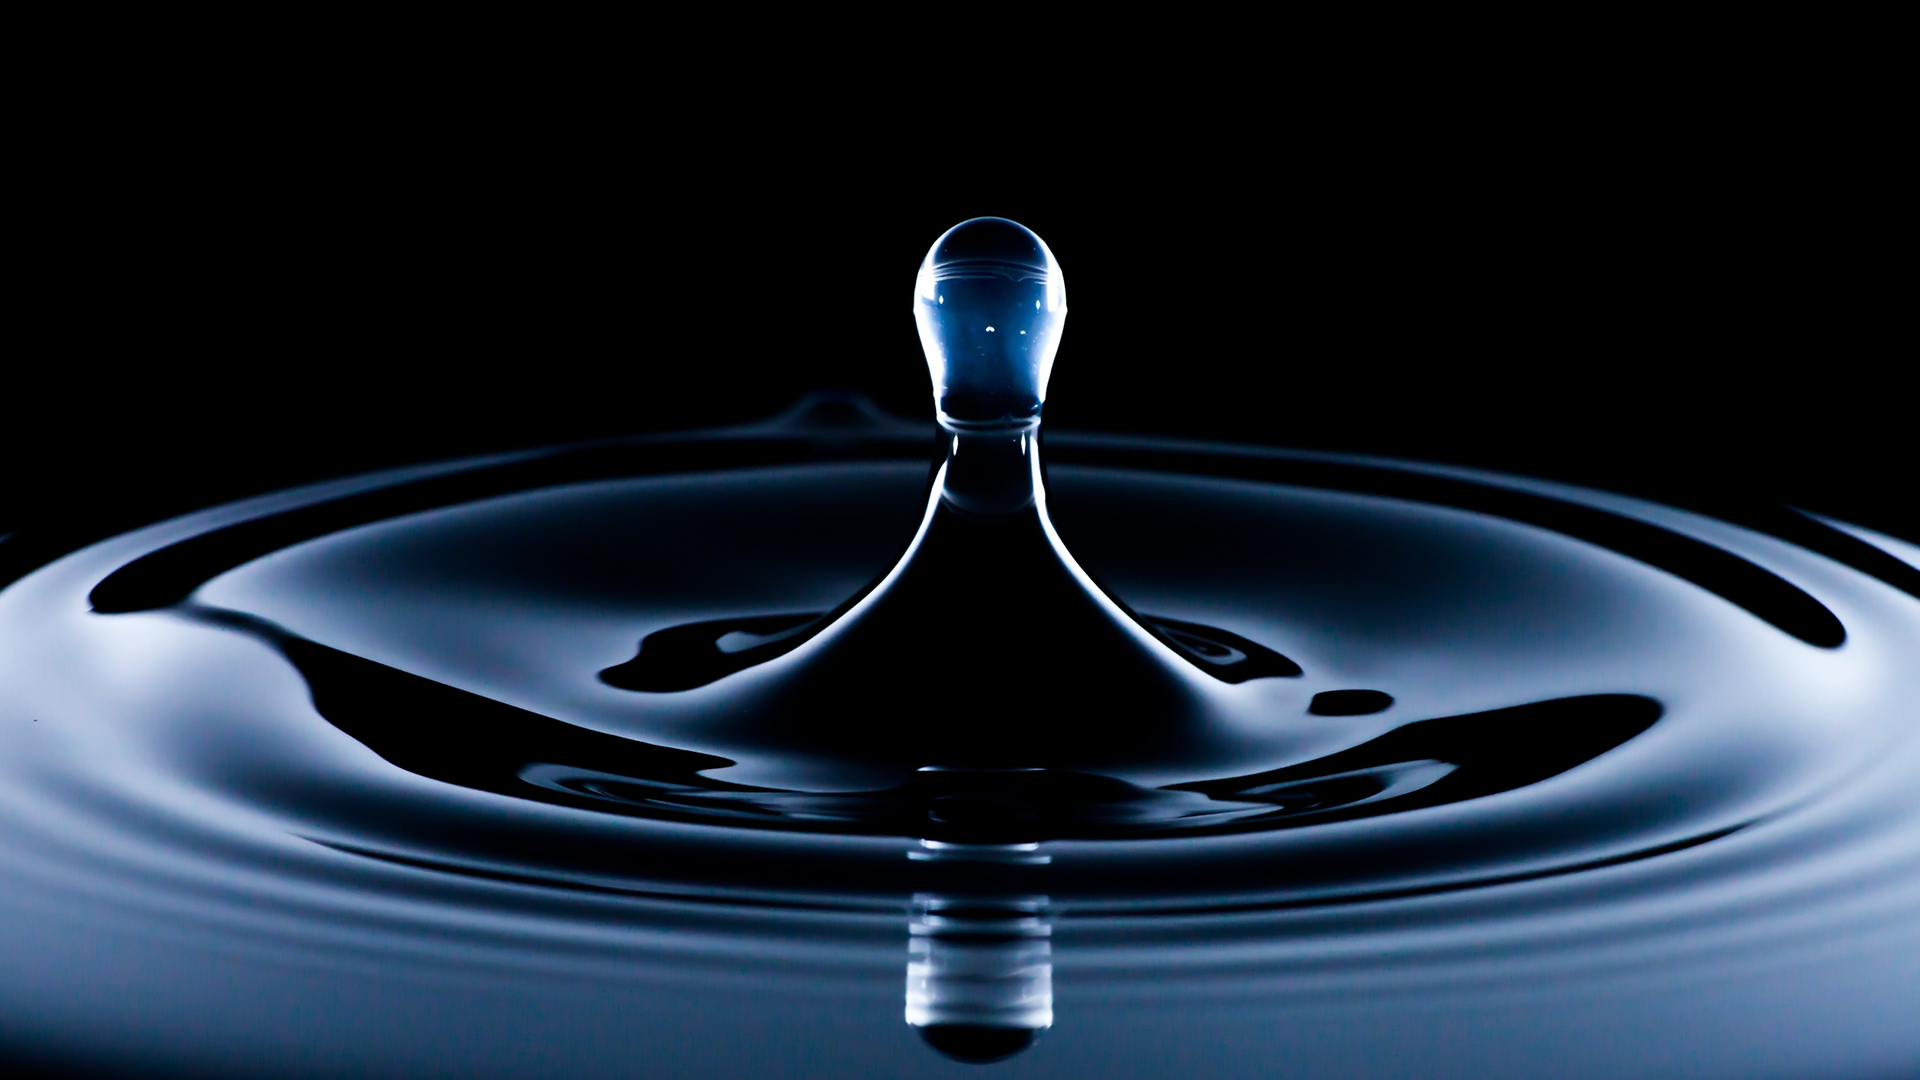 image of a drop of water